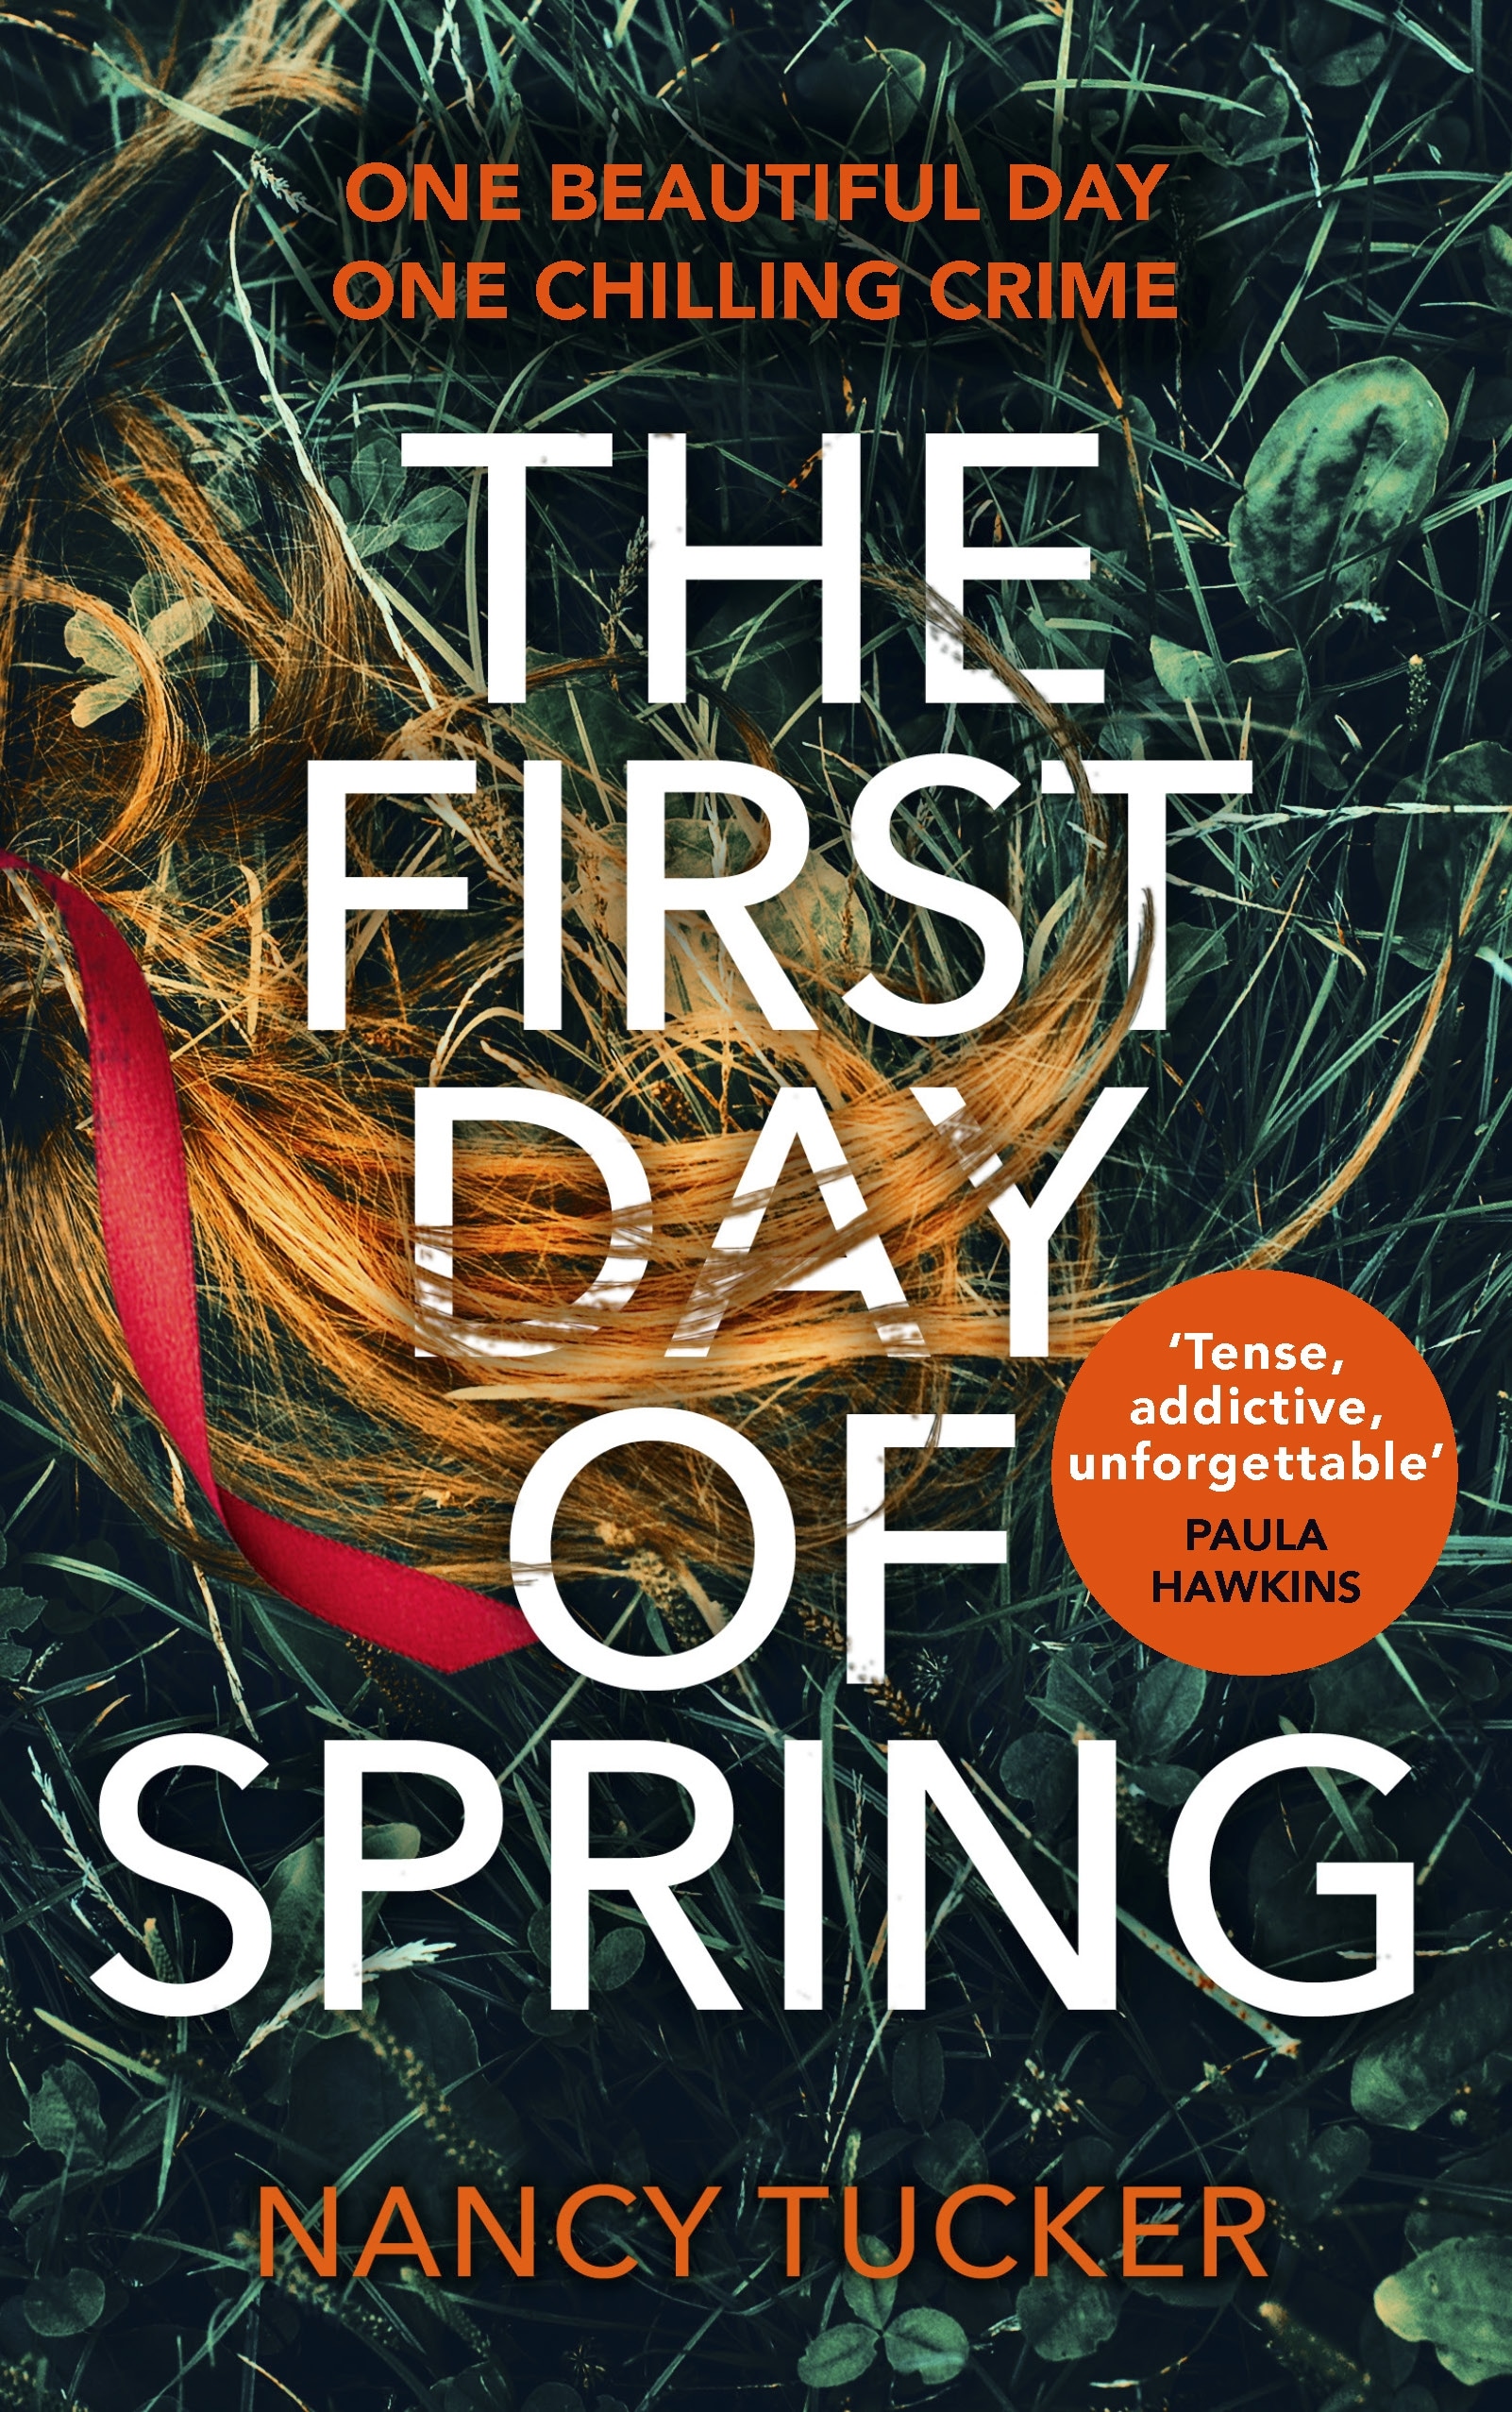 Book “The First Day of Spring” by Nancy Tucker — June 24, 2021